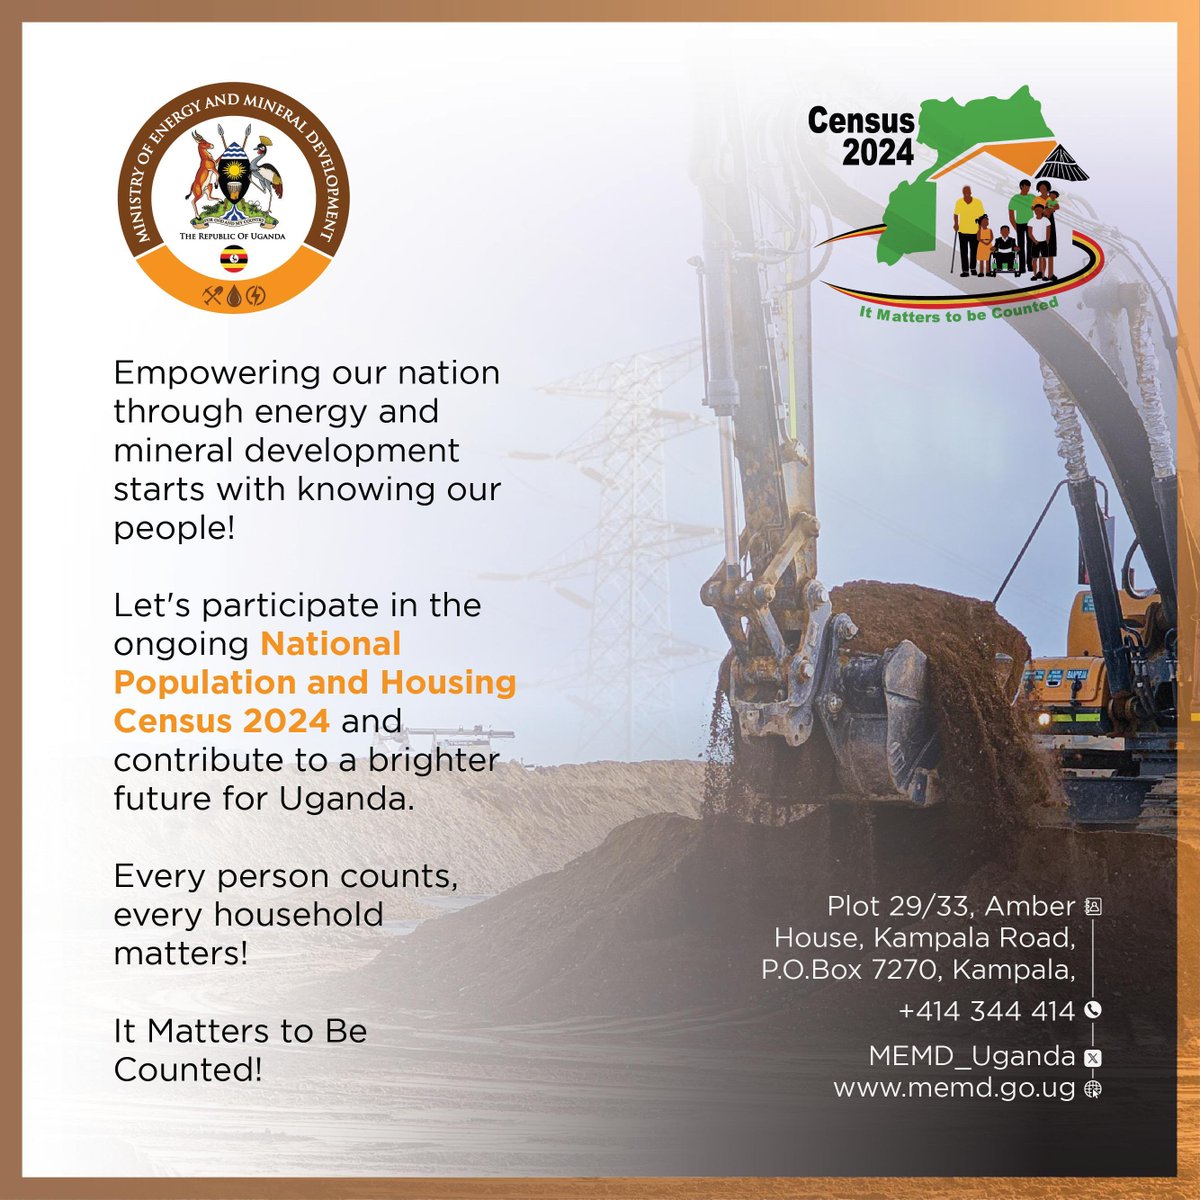 𝐈𝐓 𝐌𝐀𝐓𝐓𝐄𝐑𝐒 𝐓𝐎 𝐁𝐄 𝐂𝐎𝐔𝐍𝐓𝐄𝐃! Let's participate in the #UgandaCensus2024 and contribute to a brighter future for Uganda. Empowering Ugandan through Energy and mineral development starts with knowing our people! Every person counts, every household matters!